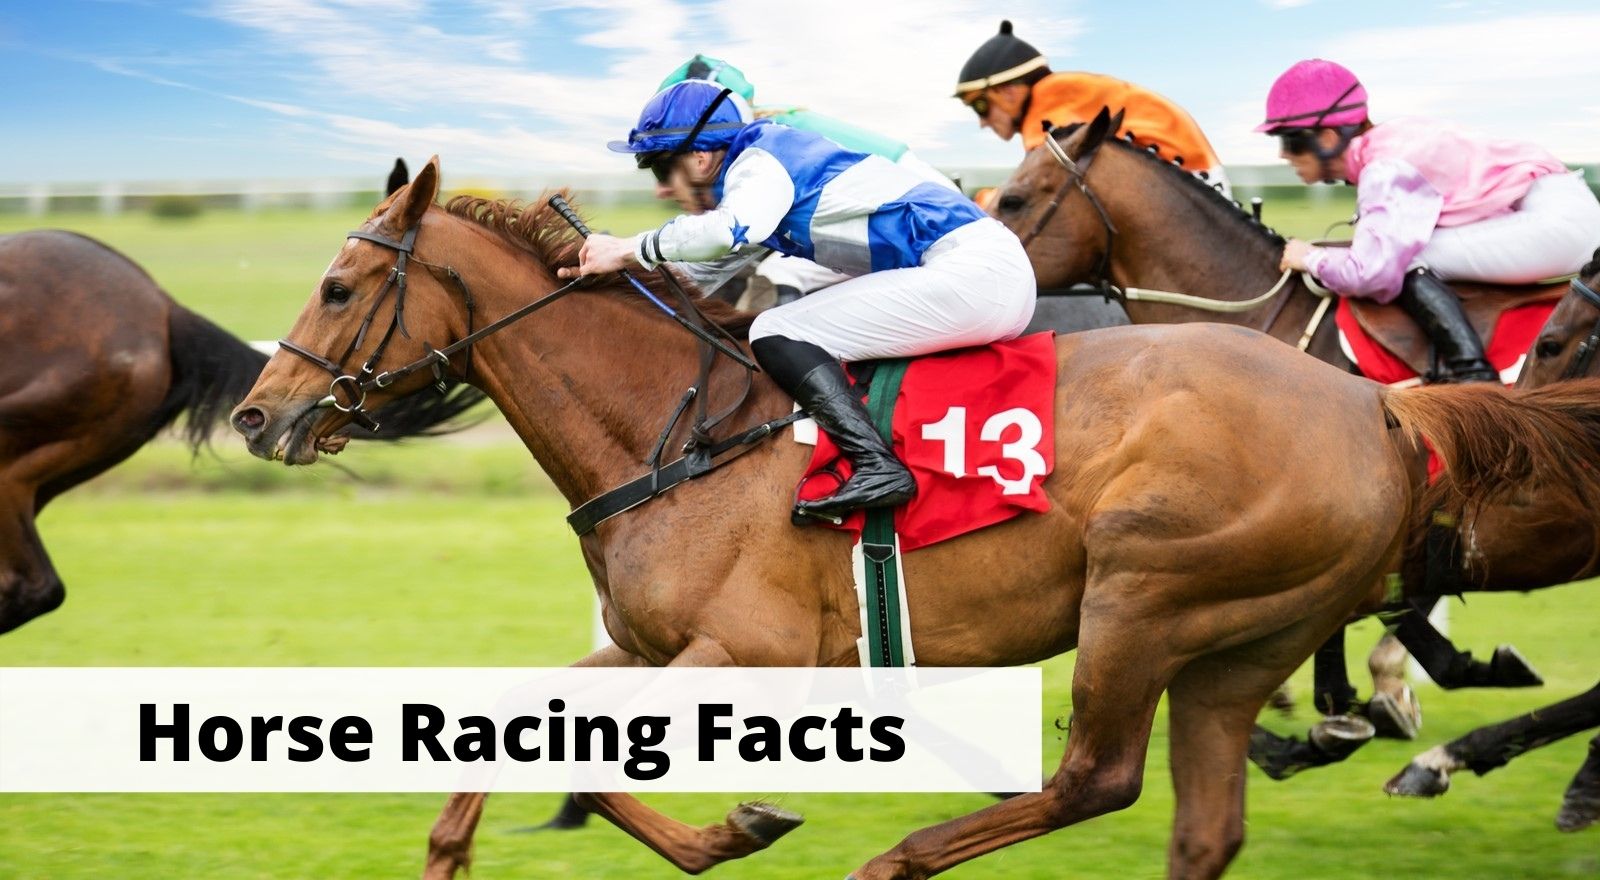 15 Fascinating Horse Racing Facts You Probably Didn’t Know